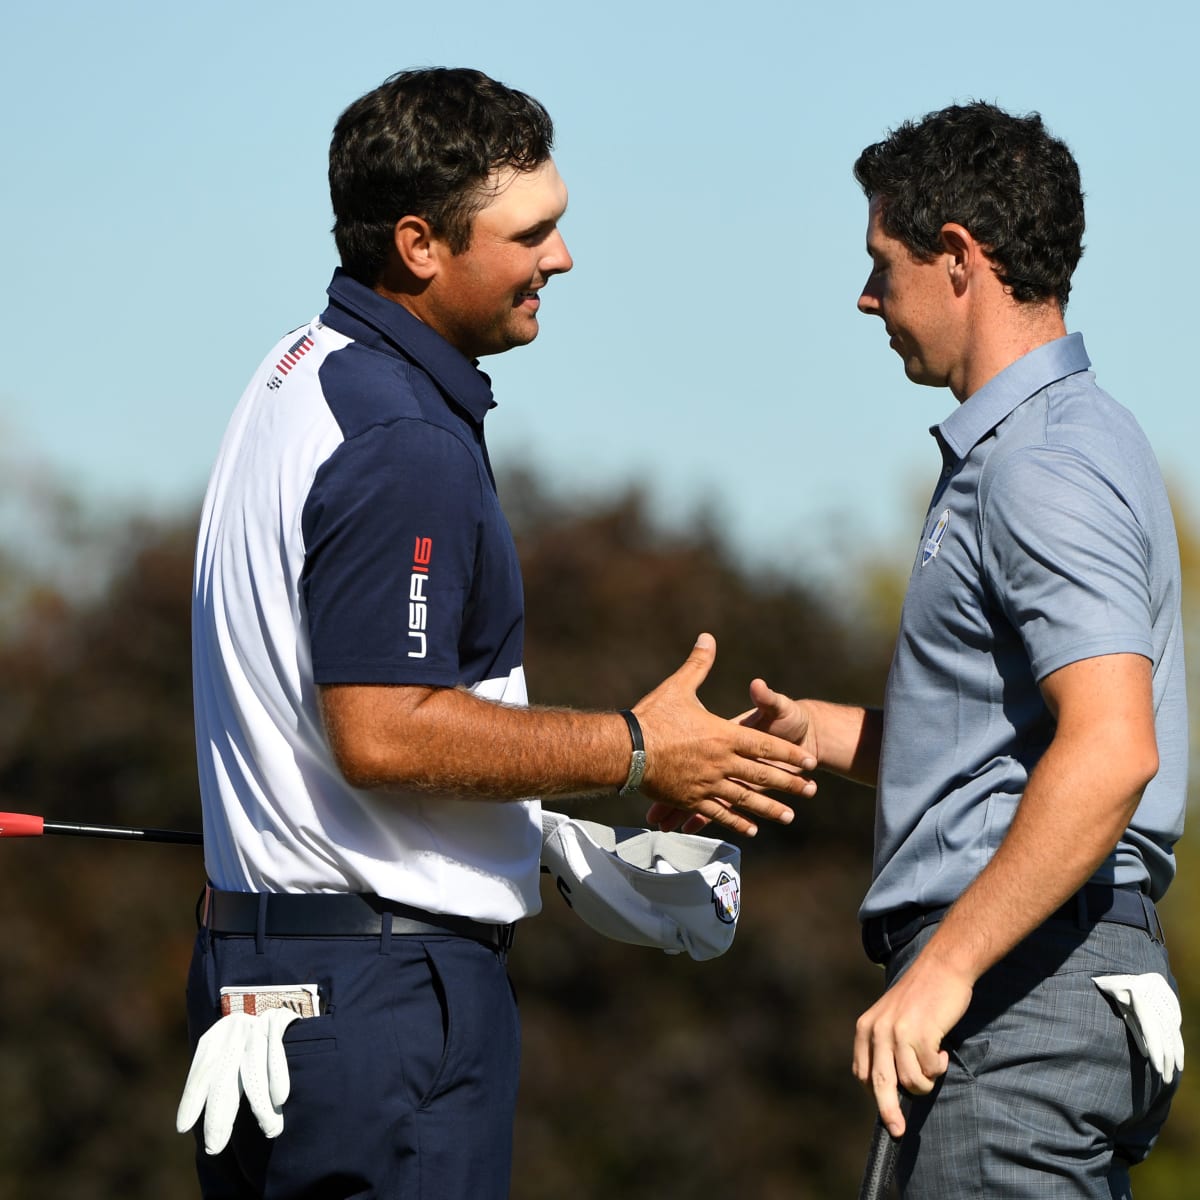 PGA Tour Players React To ‘Tee-Gate’ Between Rory McIlroy and Patrick Reed